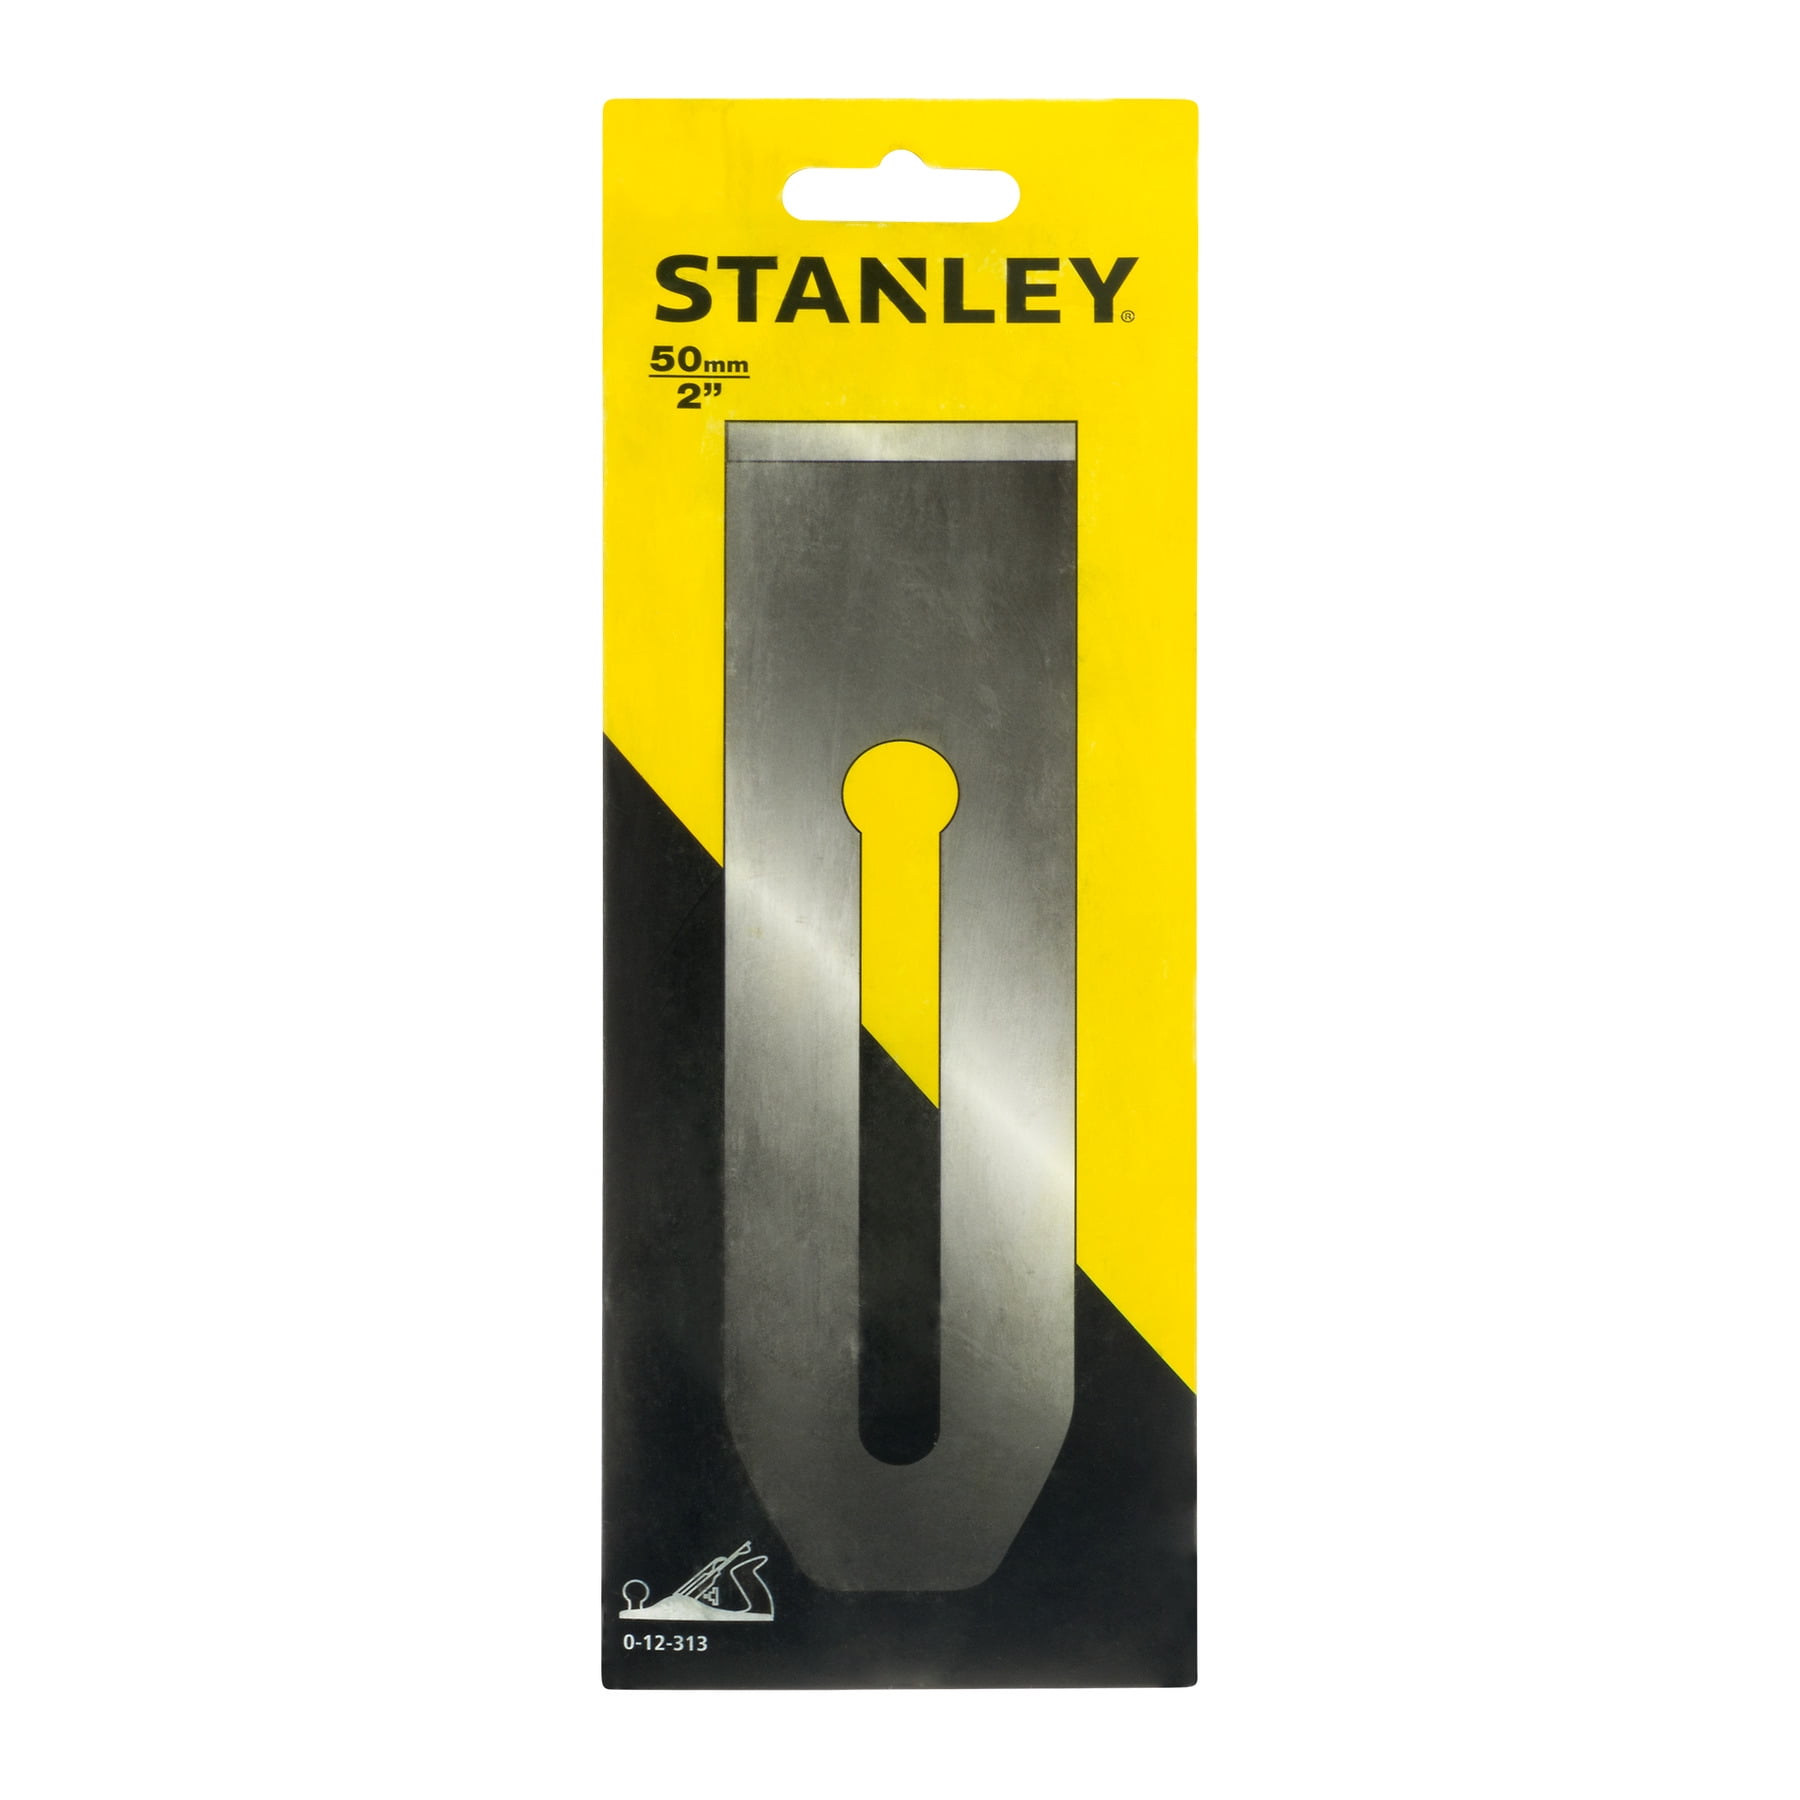 50mm REPLACEMENT #4 & #5 HAND PLANE CUTTER STANLEY 2” IRON 